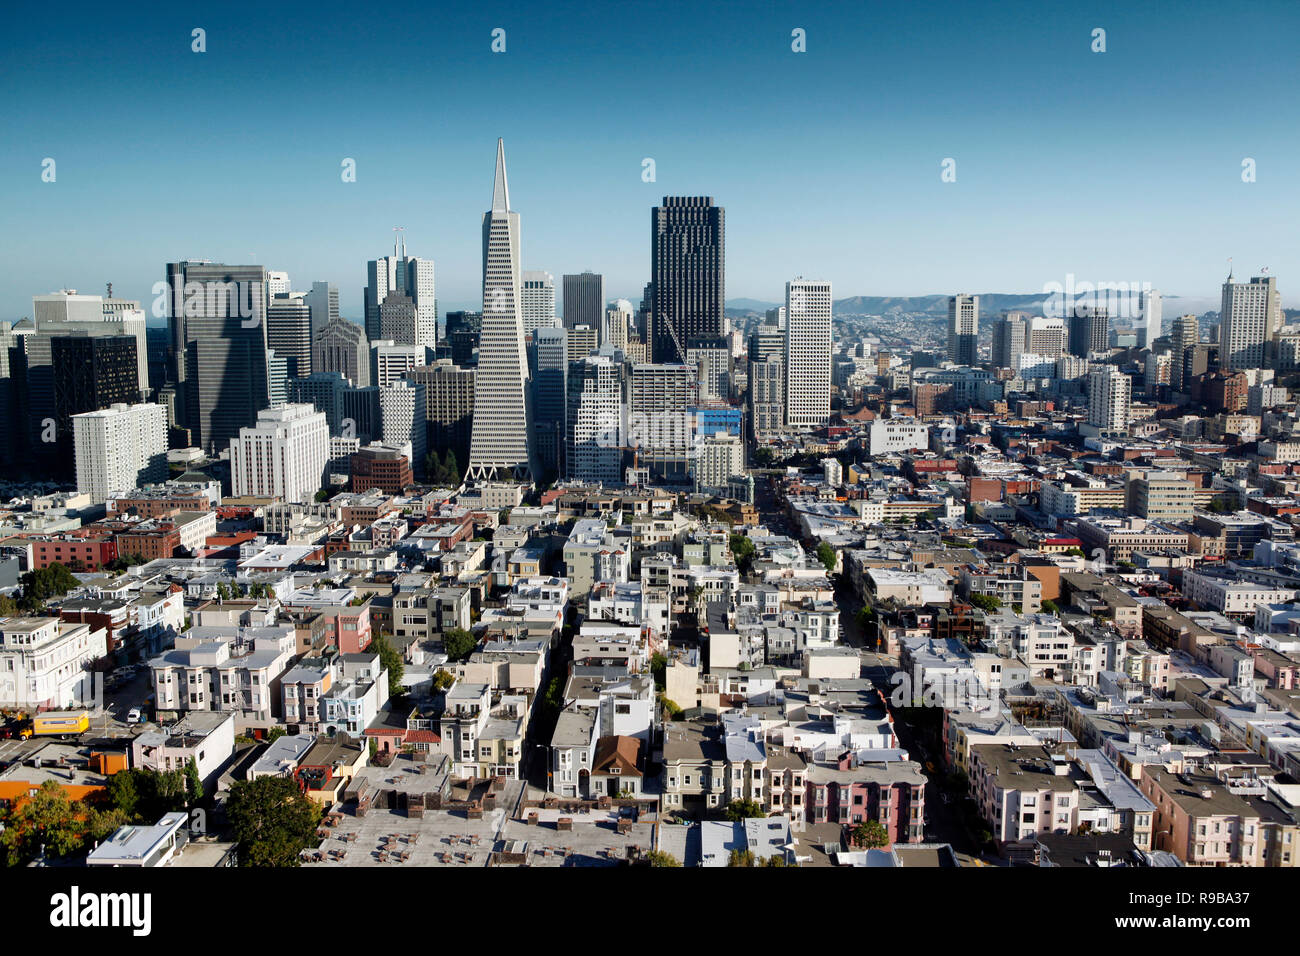 USA, California, San Francisco, an elevated view of downtown San Francisco as seen from the top of Coit Tower, Telegraph Hill Stock Photo